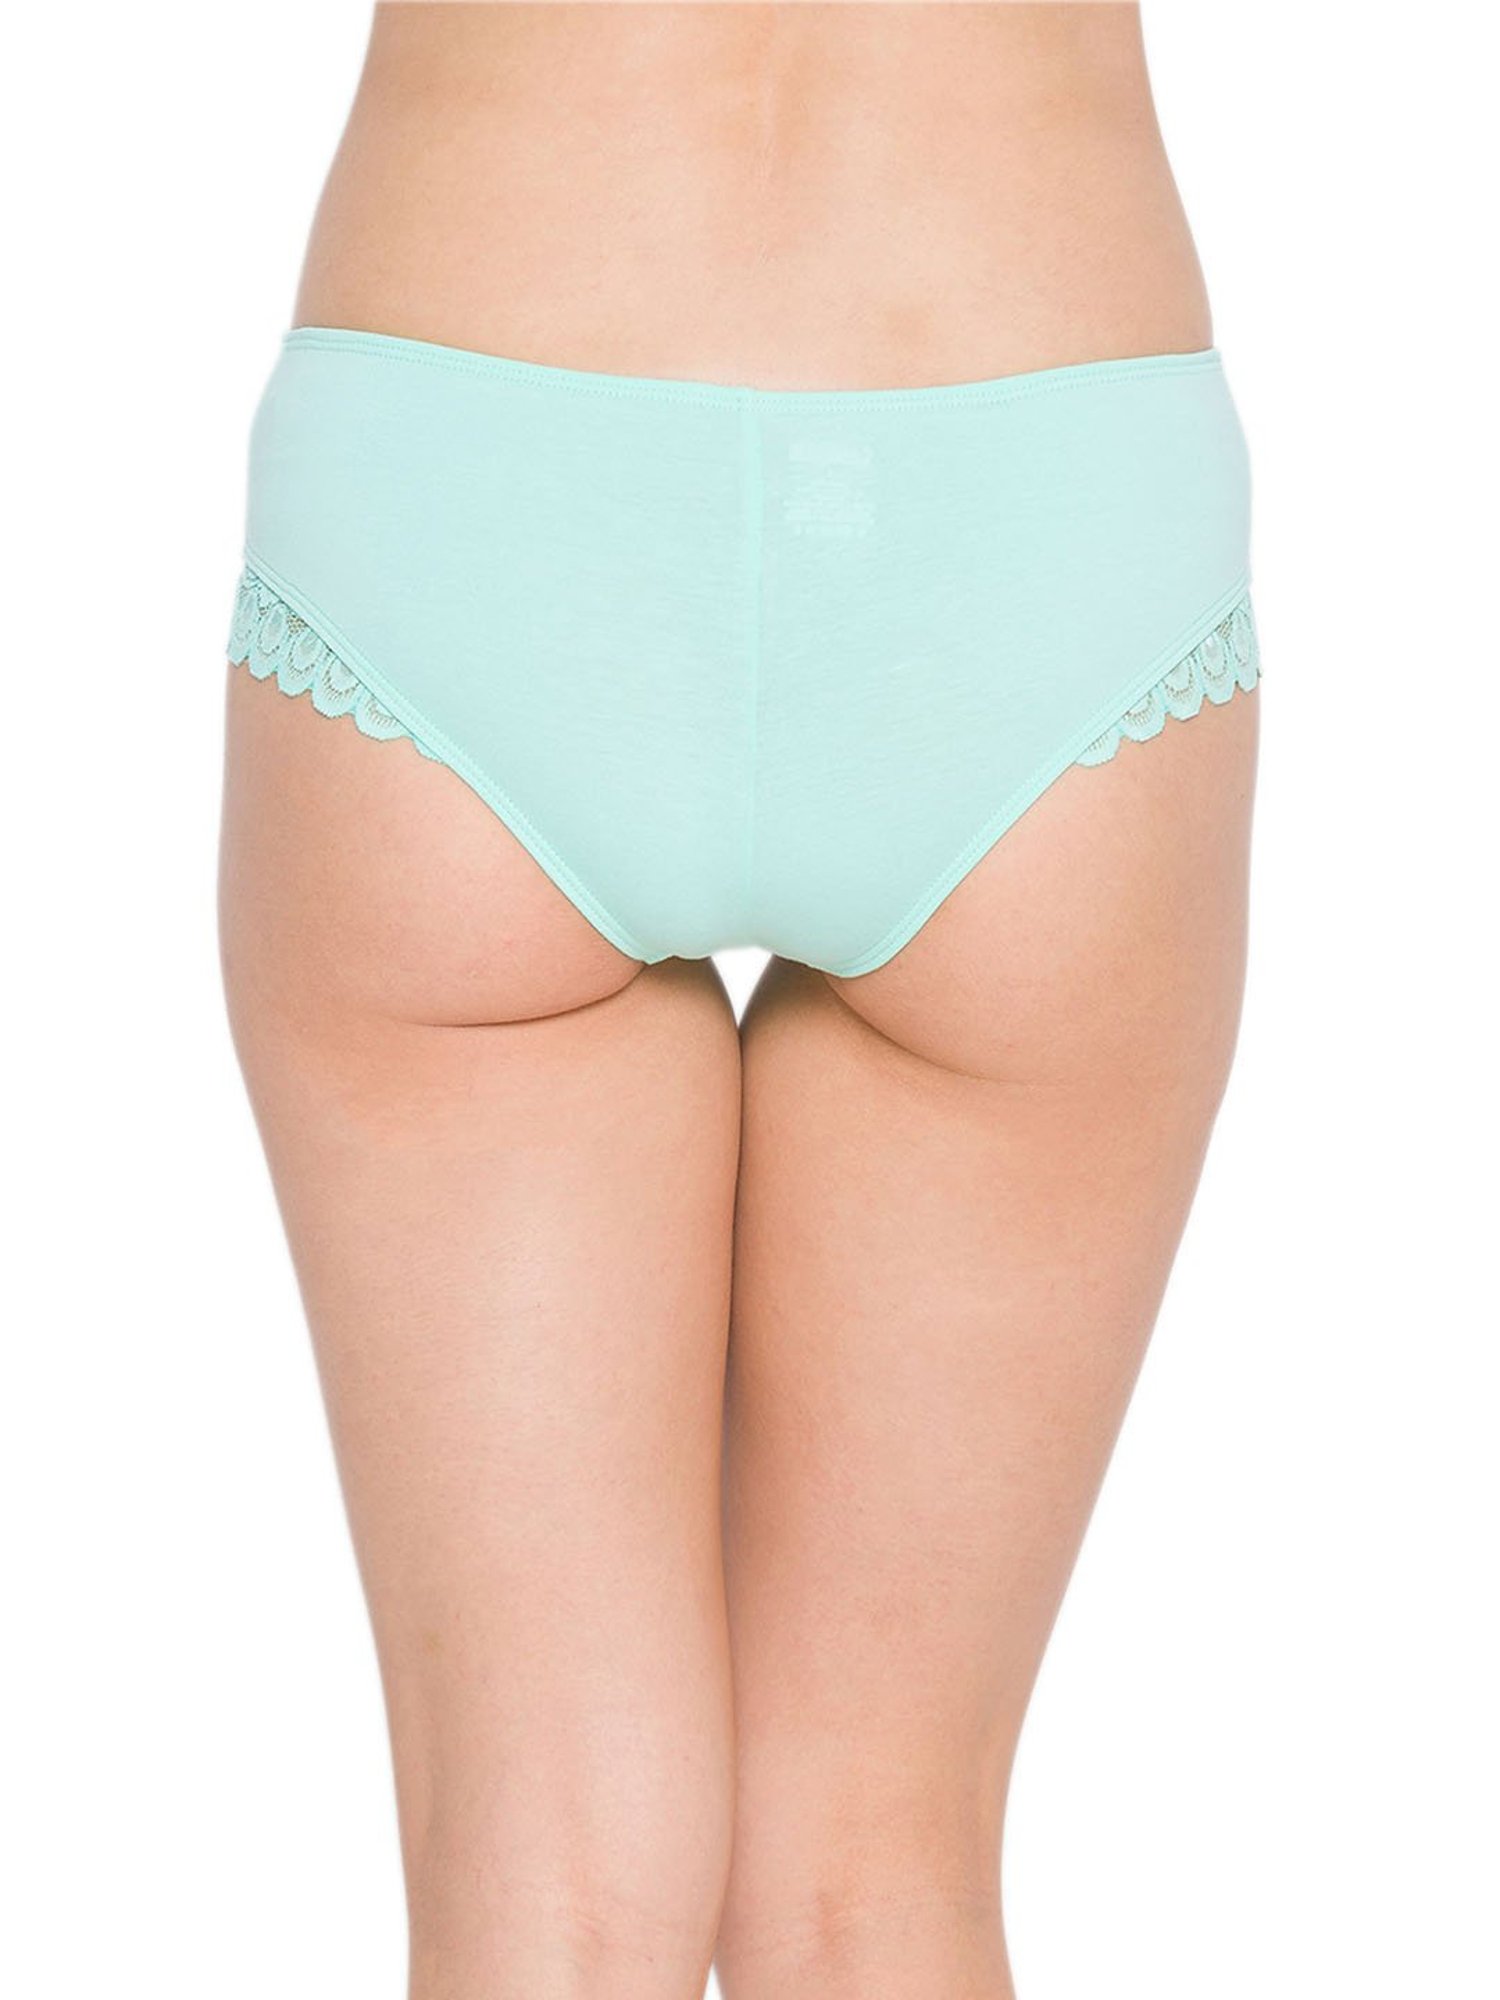 Bombas Womens Size S Mossgreen Lace Trim Cotton Blend Thong 1 Pack